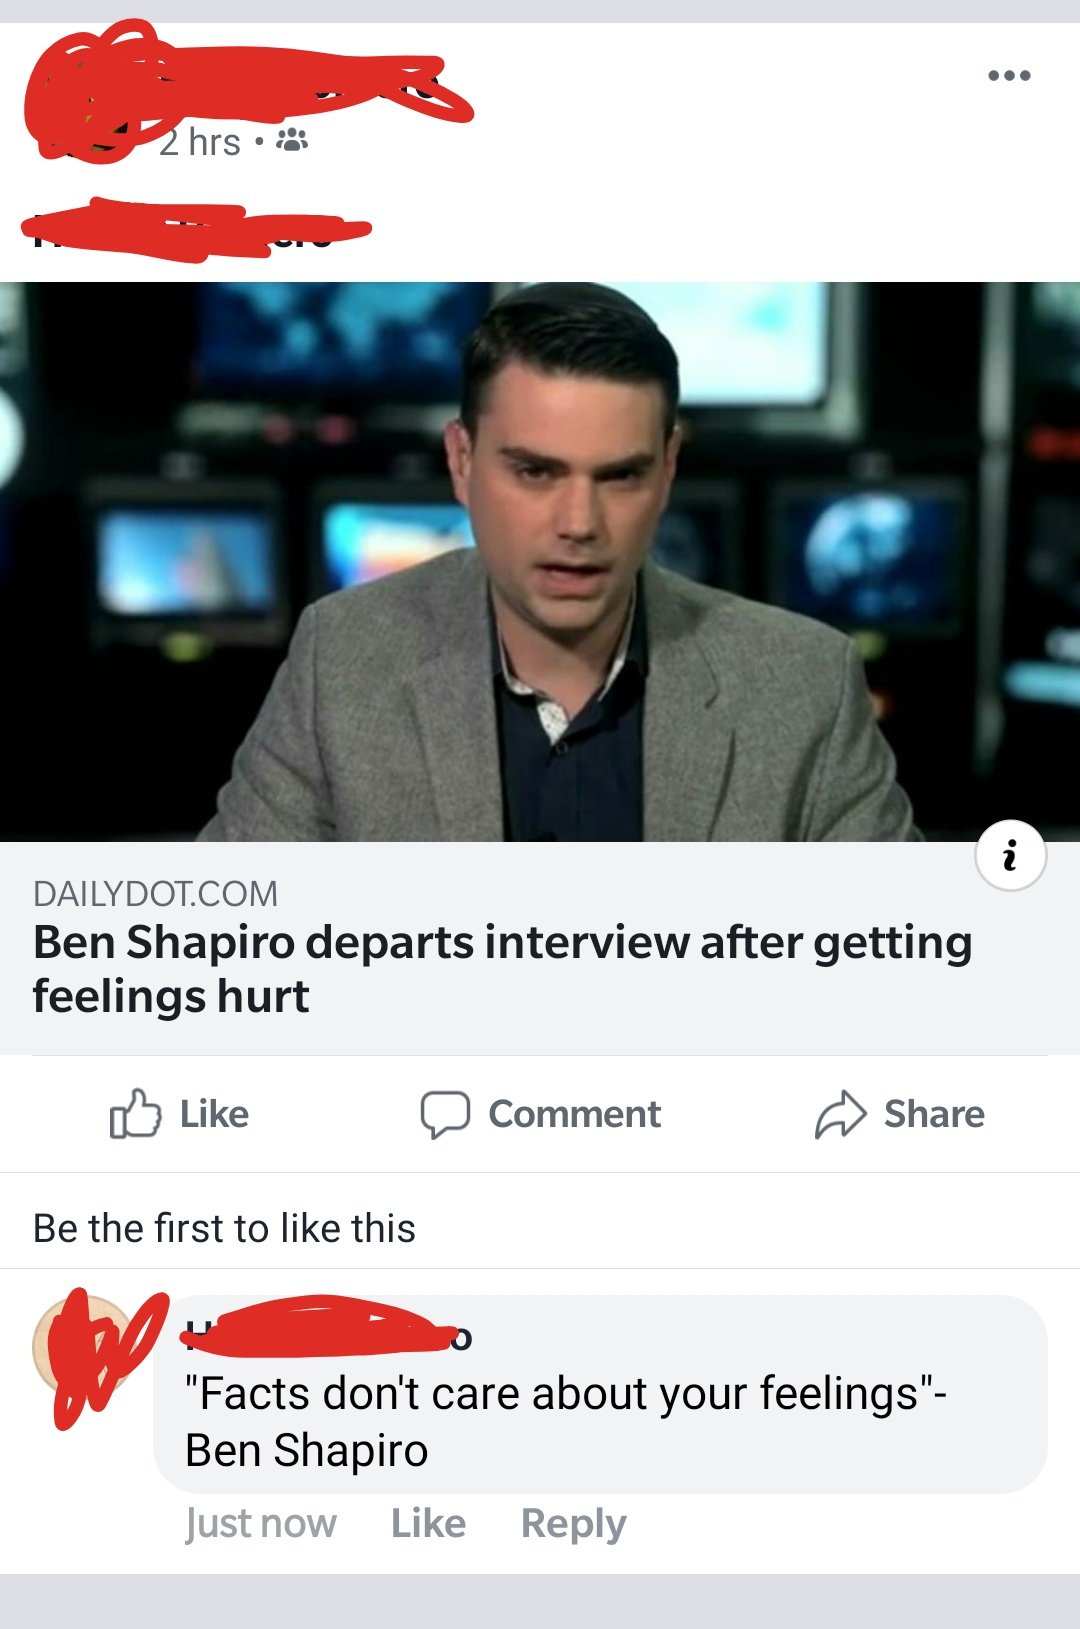 photo caption - 2 hrs. Dailydot.Com Ben Shapiro departs interview after getting feelings hurt DComment Be the first to this "Facts don't care about your feelings" Ben Shapiro Just now